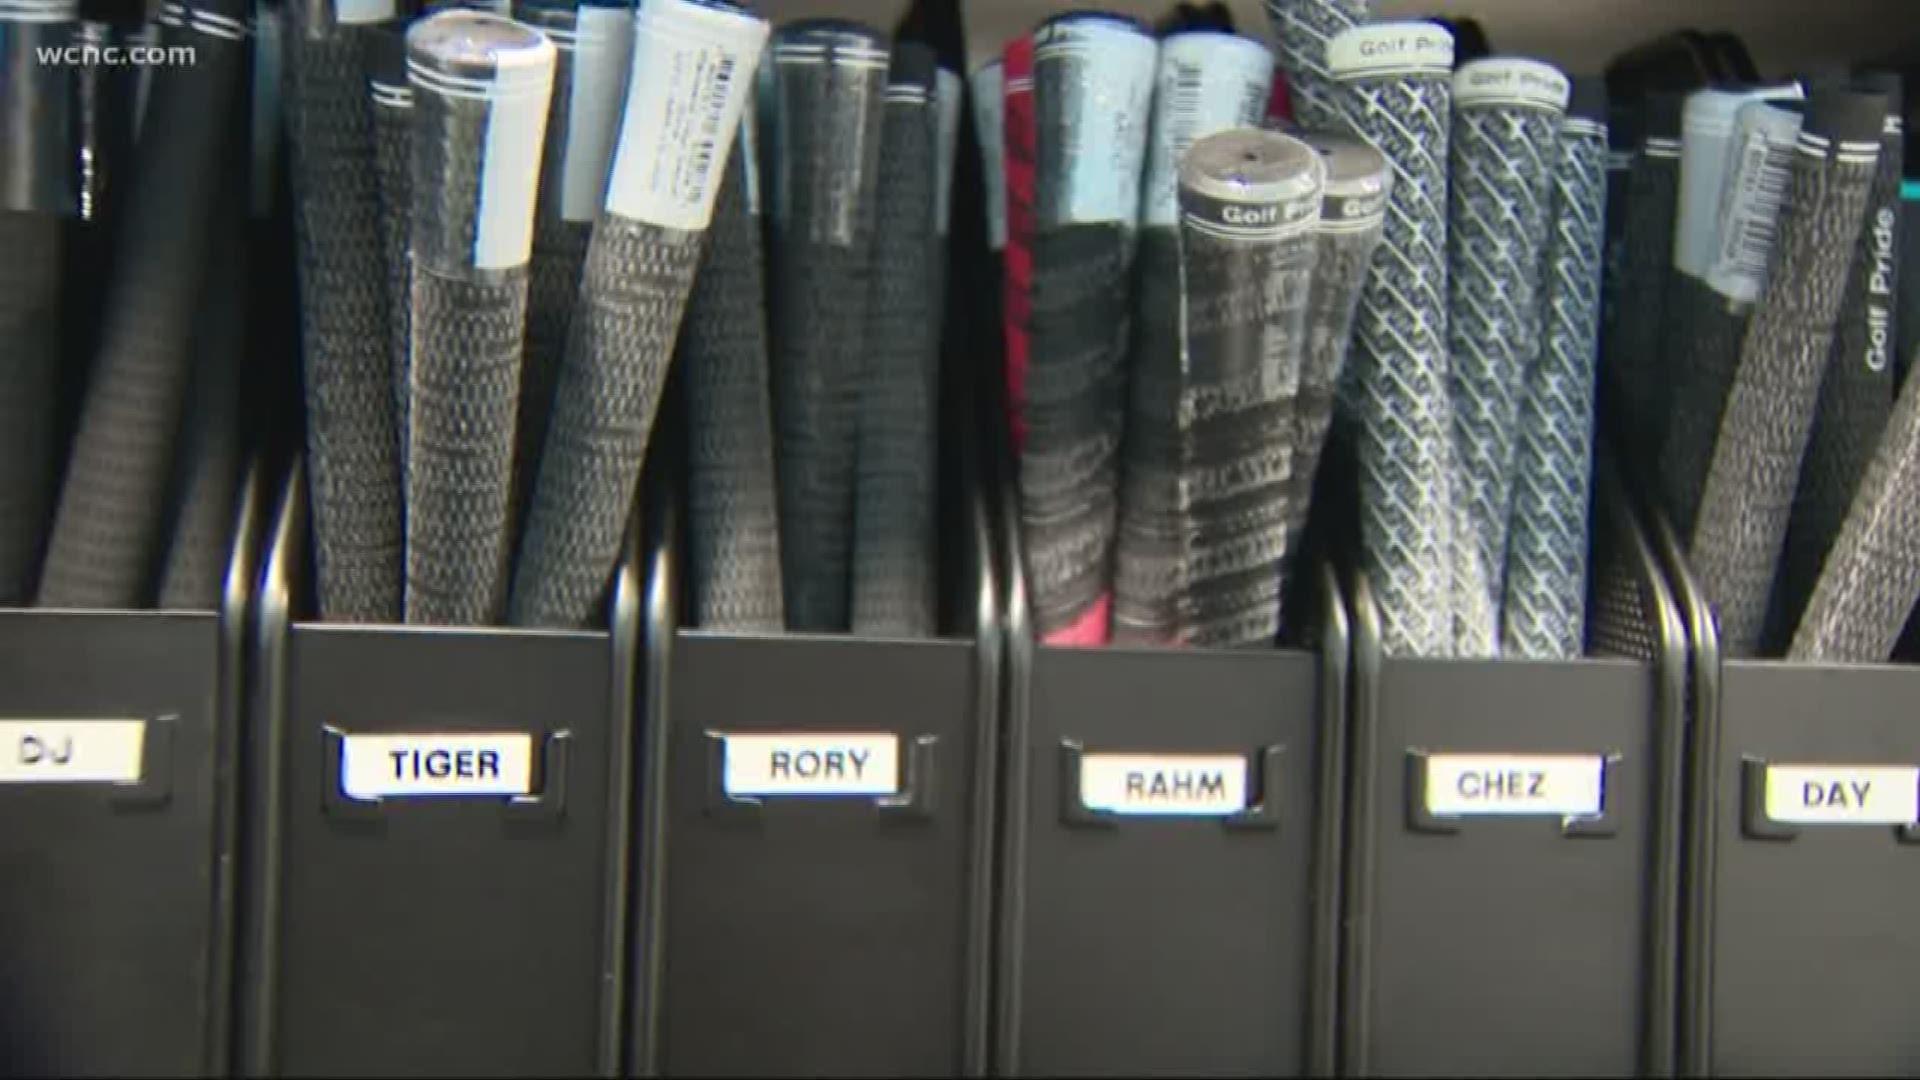 NBC Charlotte got an inside look at the place where some of the world's top golfers go for their equipment.